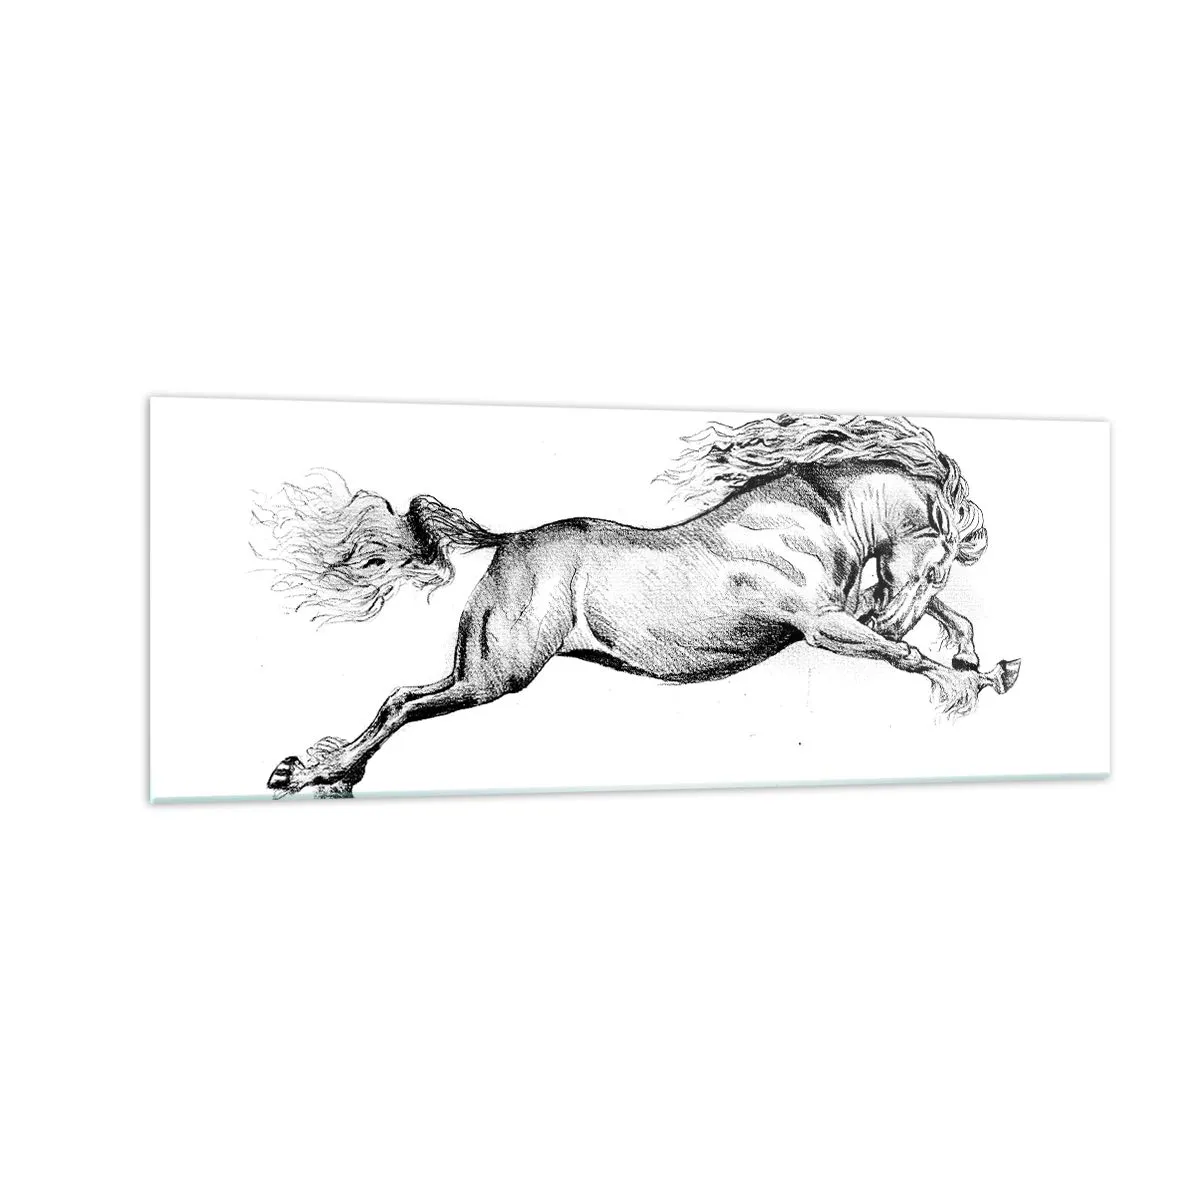 Glass picture  Arttor 140x50 cm - Stopped at a Gallop - Horse, Animals, Graphics, Black And White, Jump, For living-room, For bedroom, White, Black, Horizontal, Glass, GAB140x50-4906